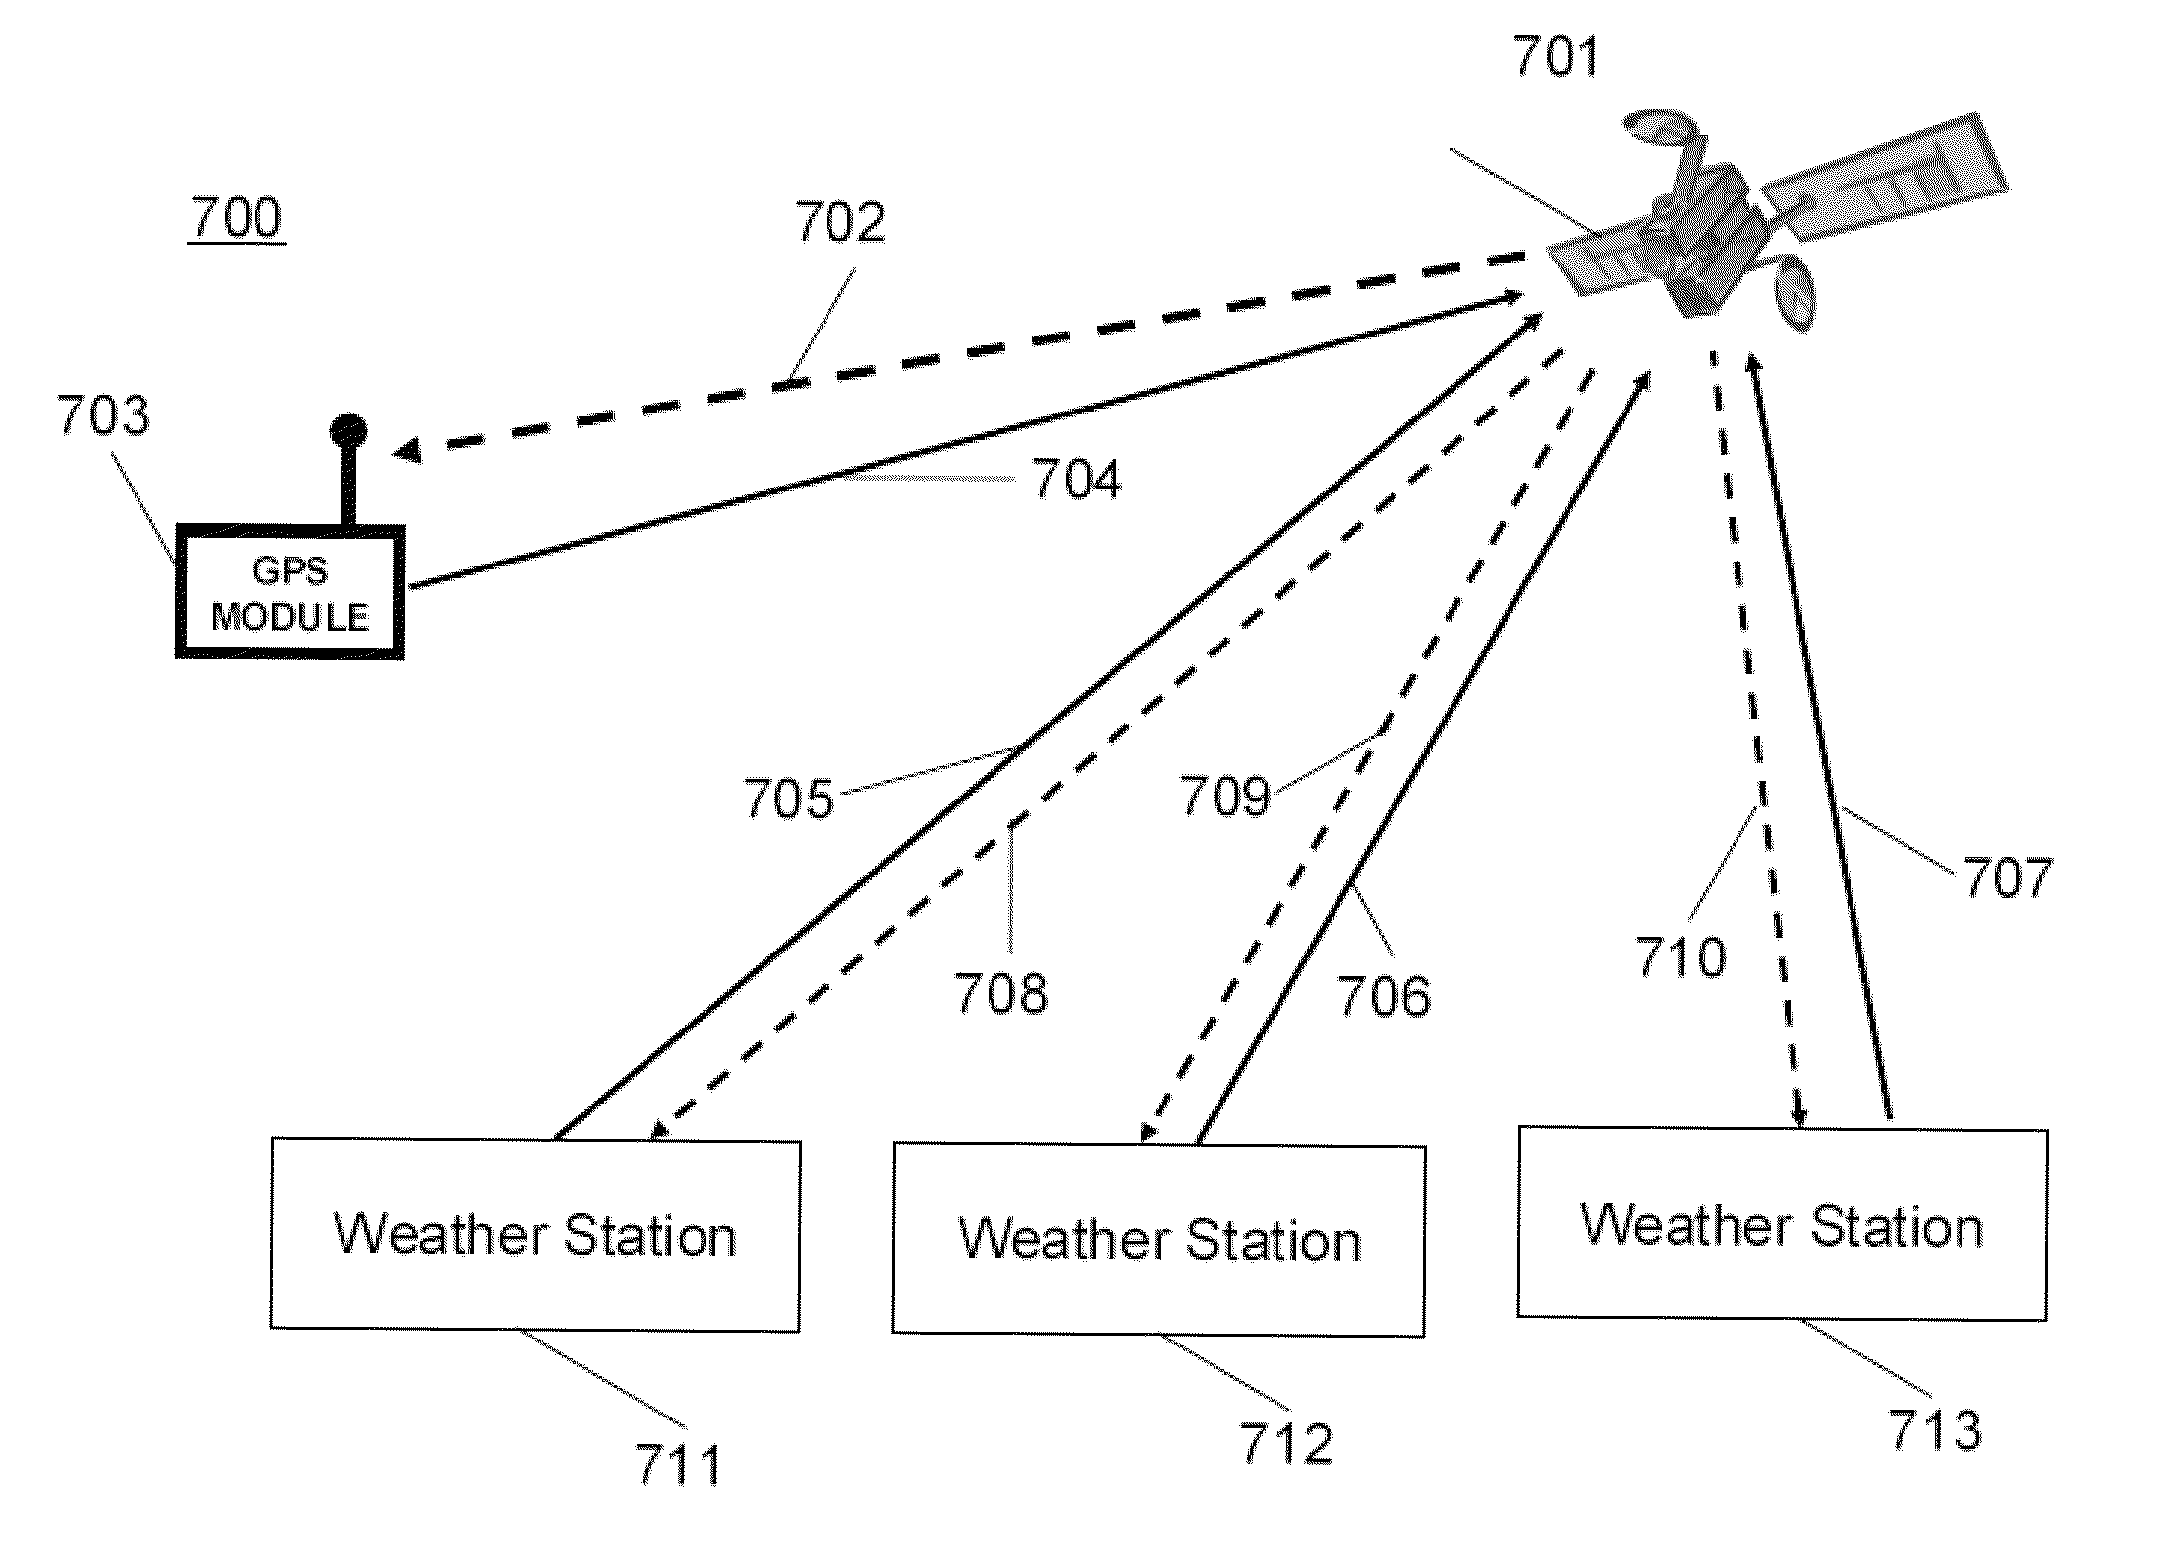 Method and apparatus of transmitting, receiving, displaying and playing weather data